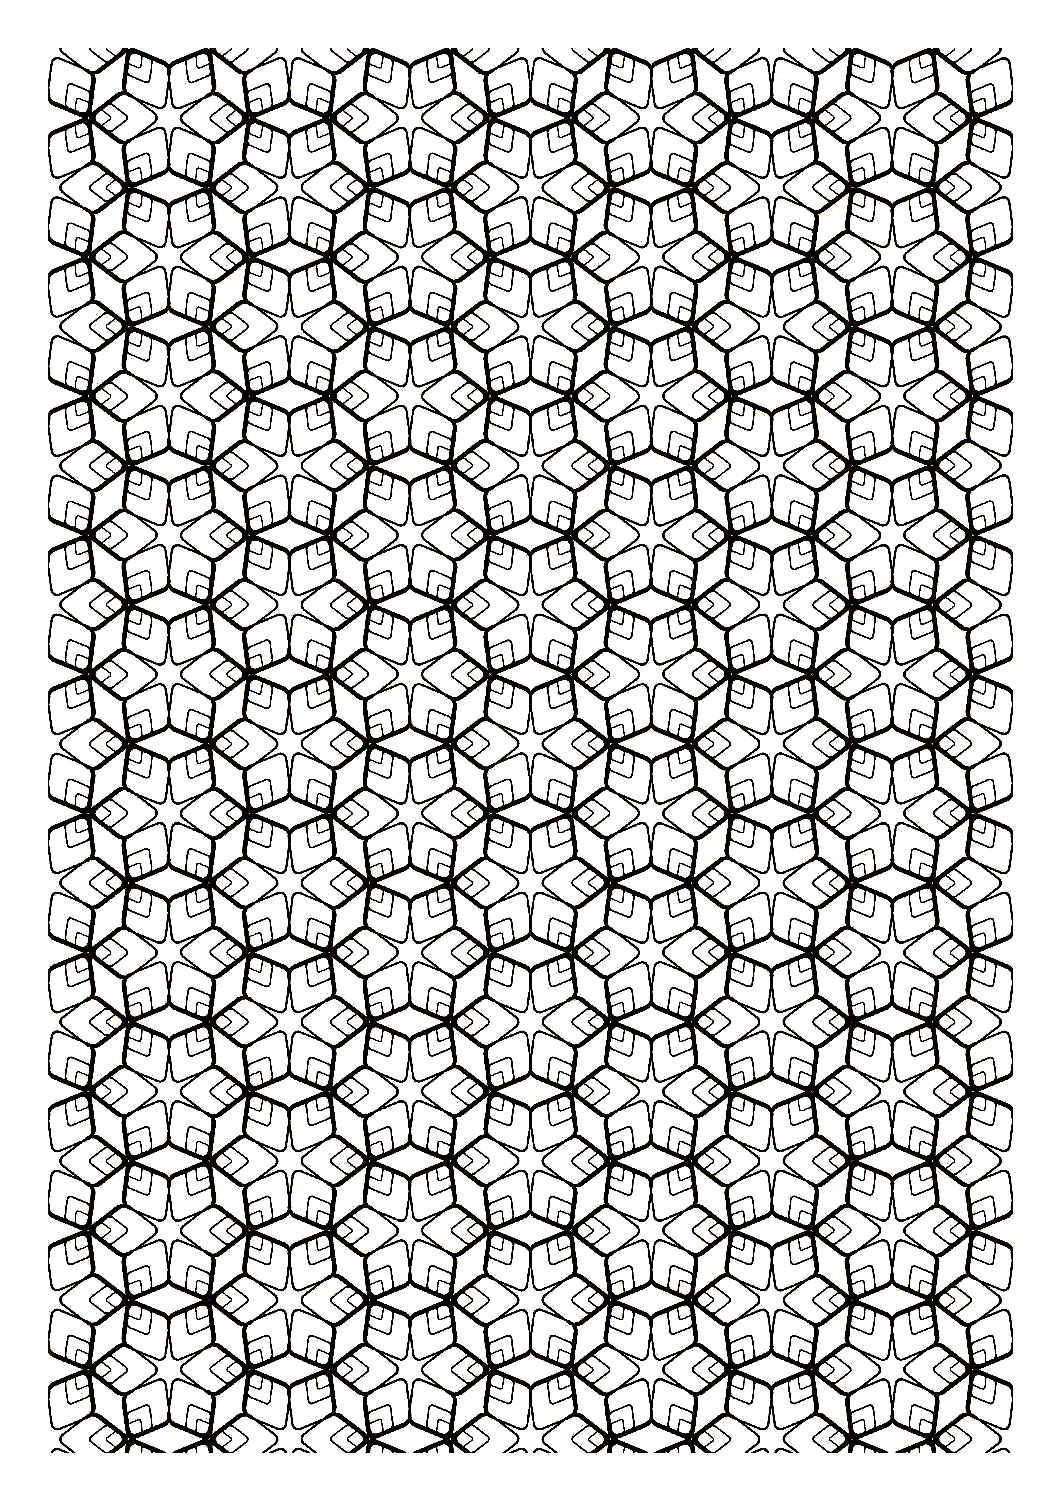 Numerous and geometric hexagons to color individually